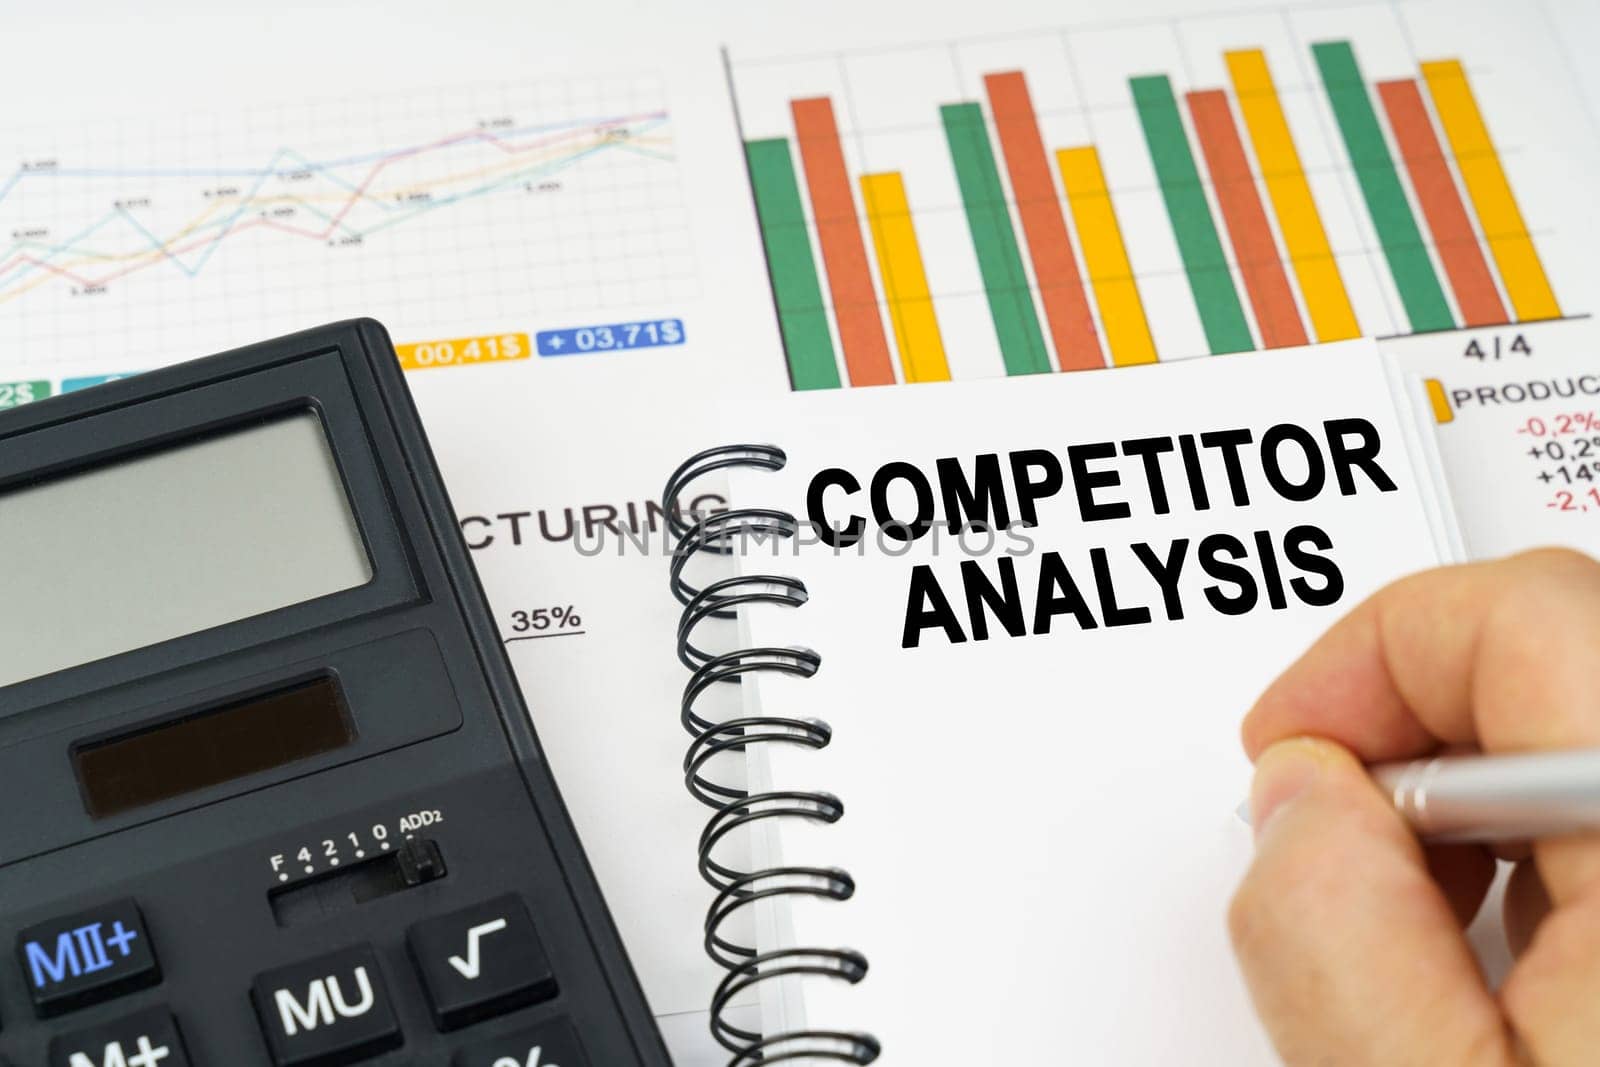 There is a calculator on the table, business charts, a man made a note in a notebook - Competitor Analysis by Sd28DimoN_1976